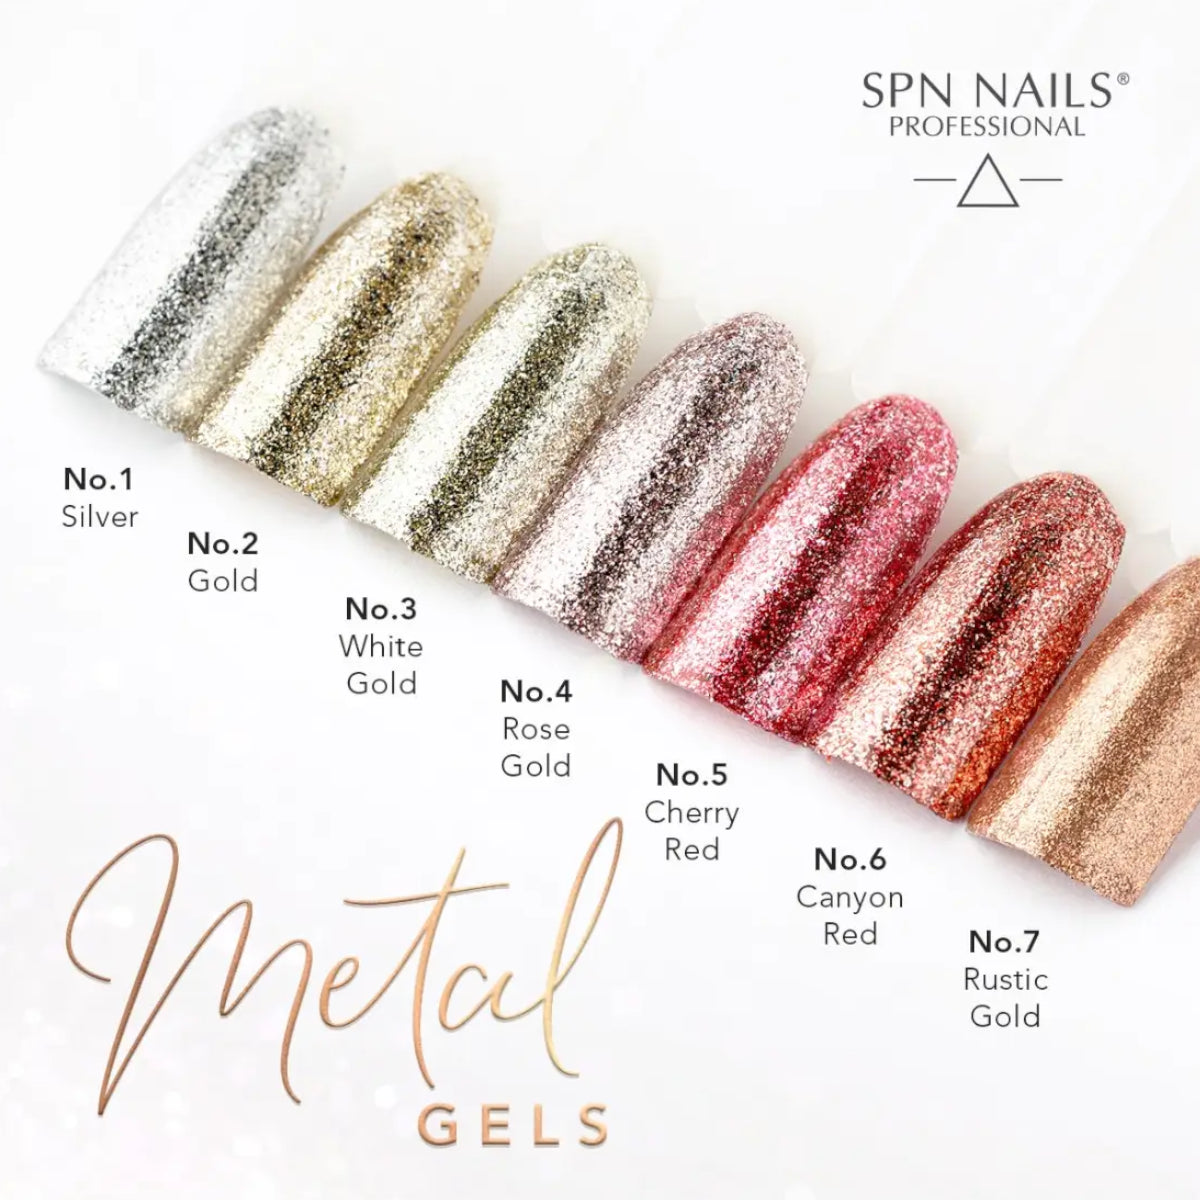 SPN Nails Metal Gel No.7 Rustic Gold Glitter NAils Collection